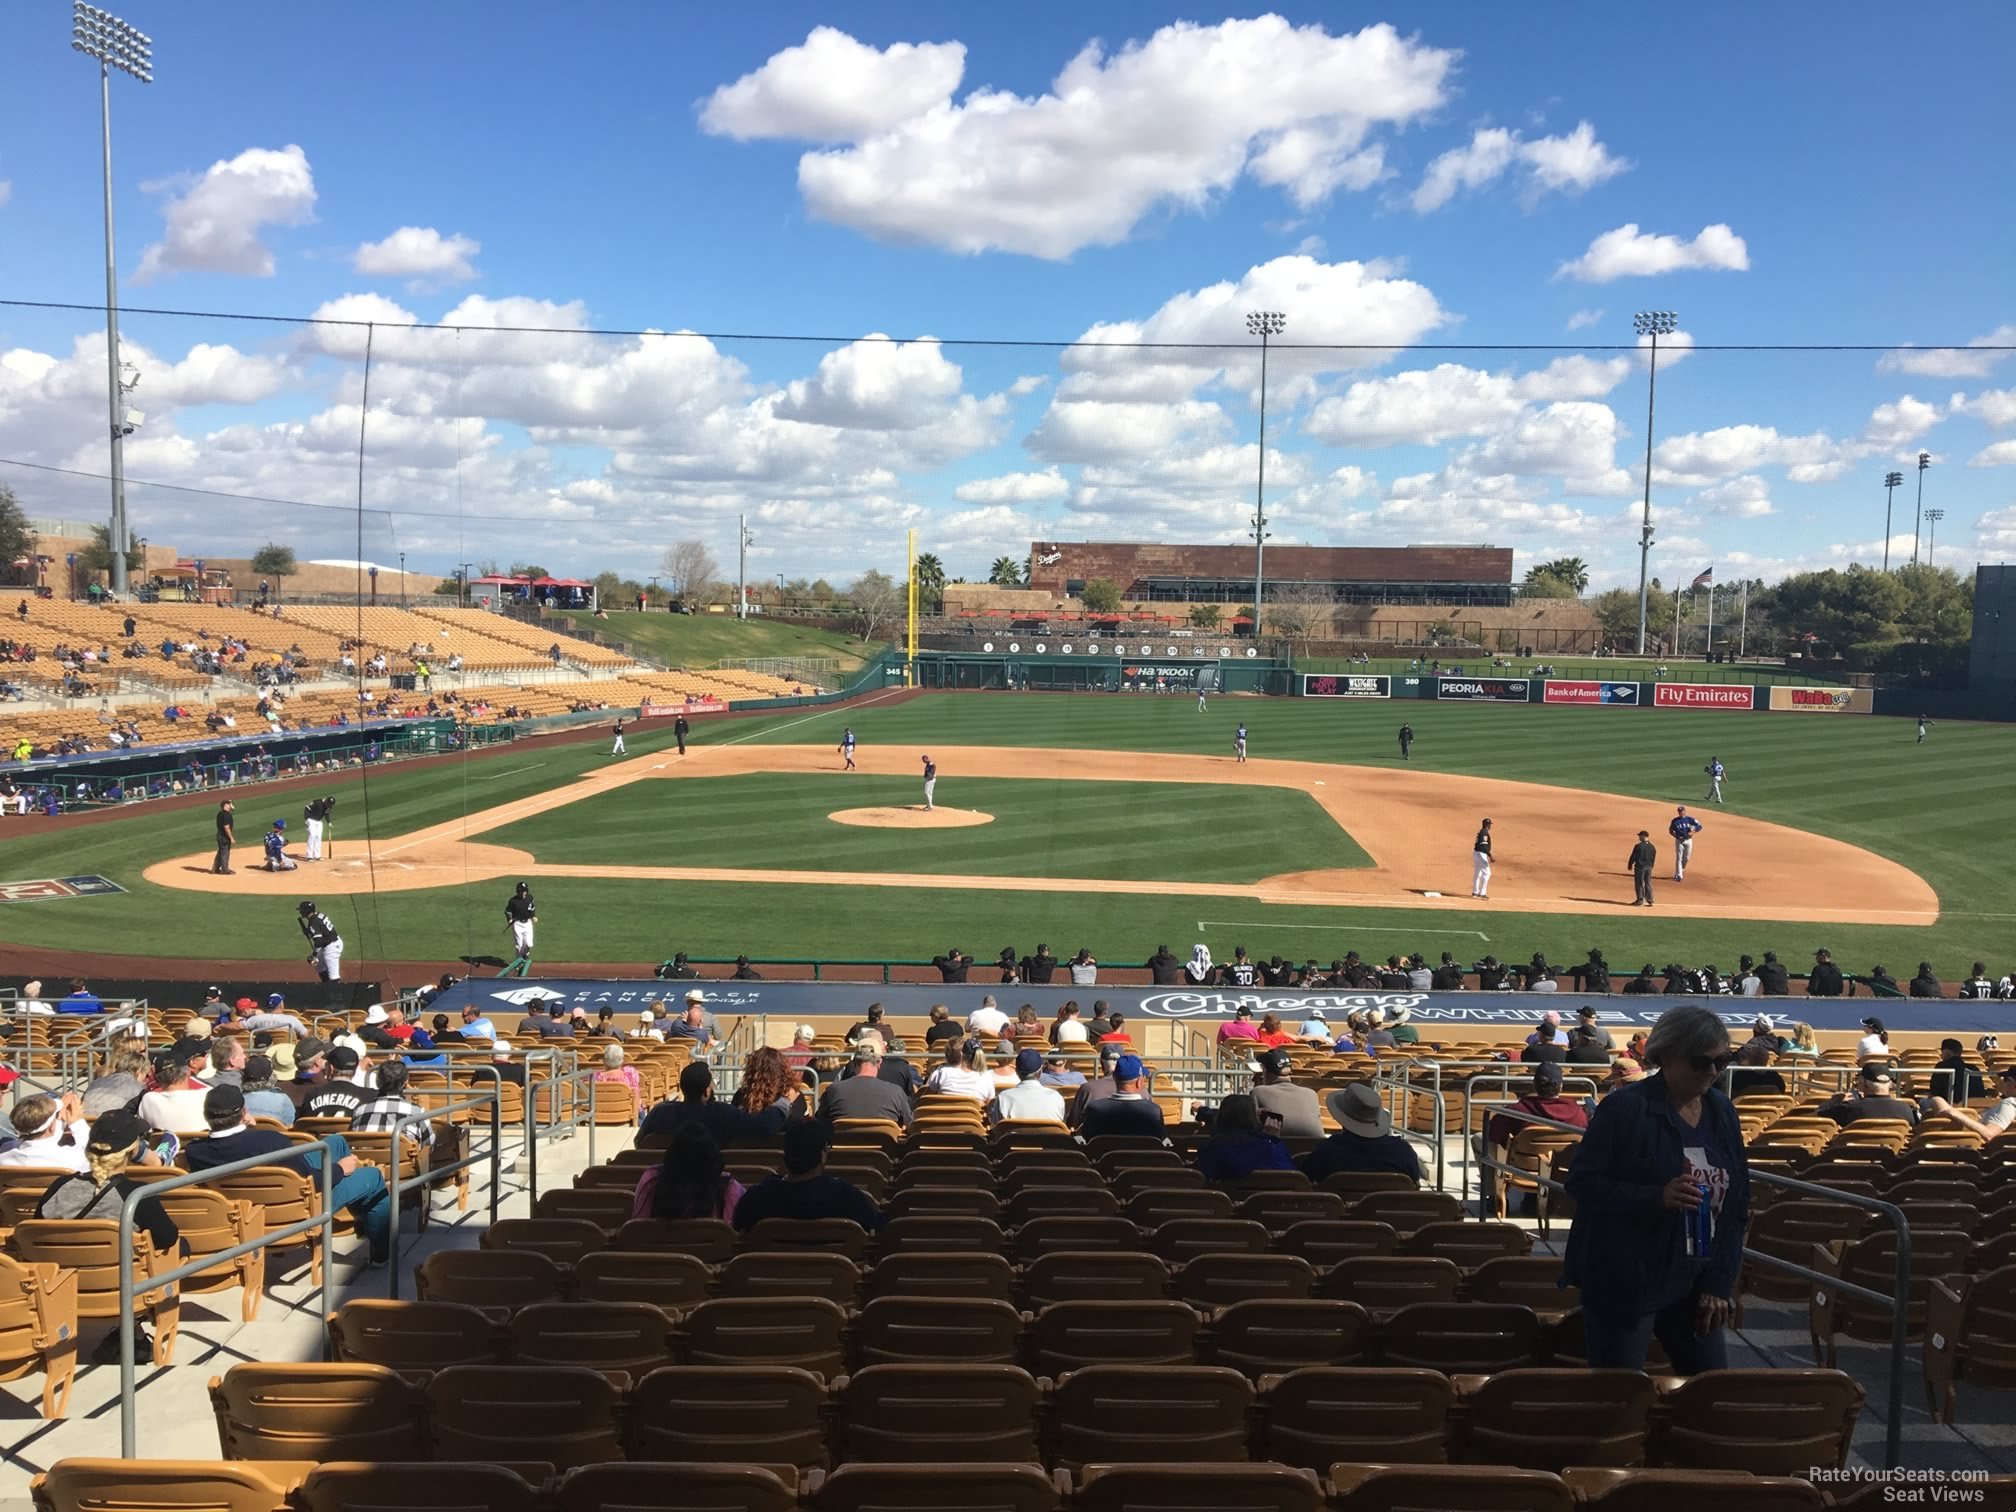 section 109, row 18 seat view  - camelback ranch